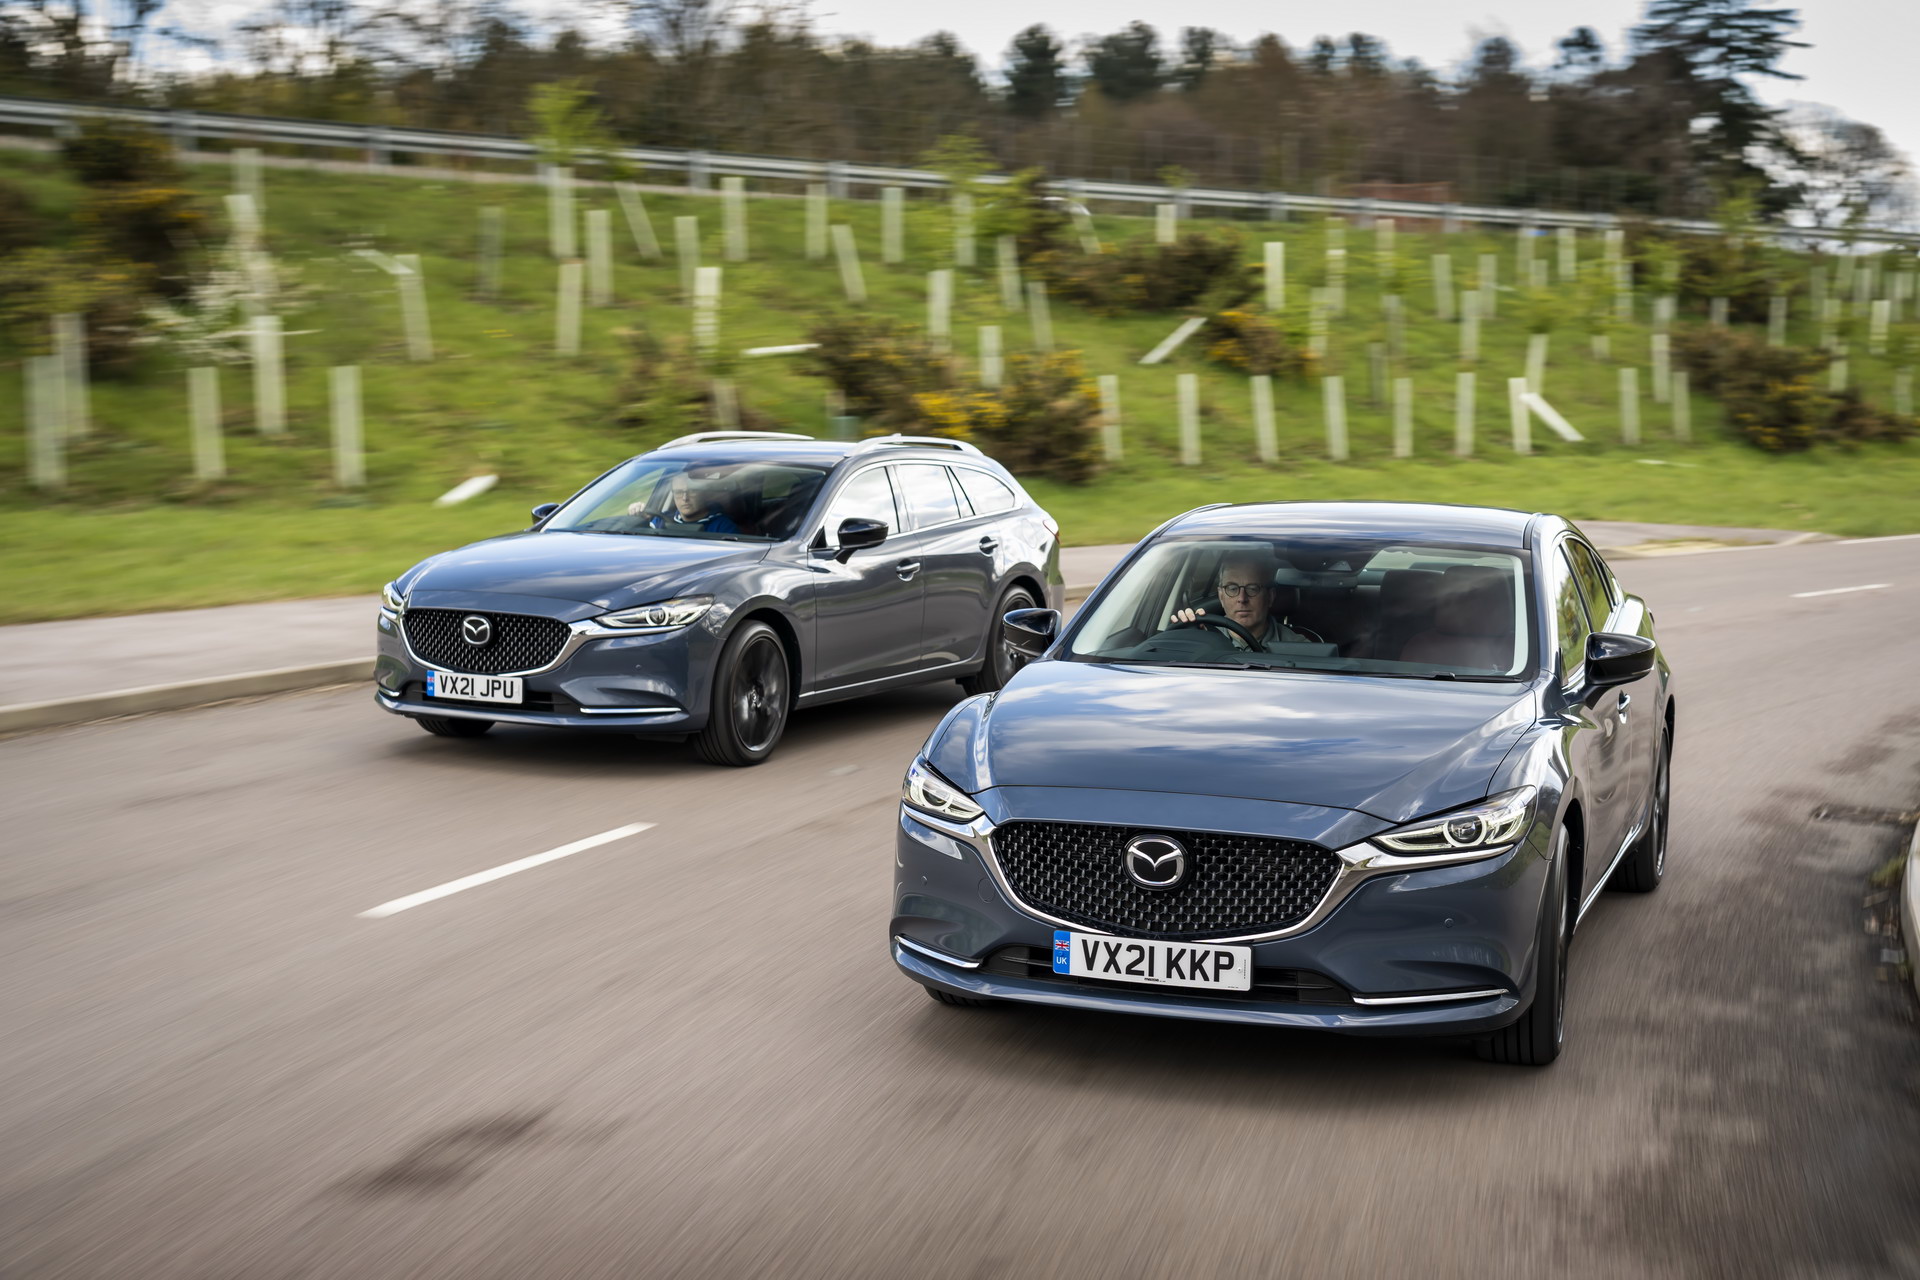 Headline: The Mazda6 Is Dead for 2022; What Sedans Can You Still Buy?